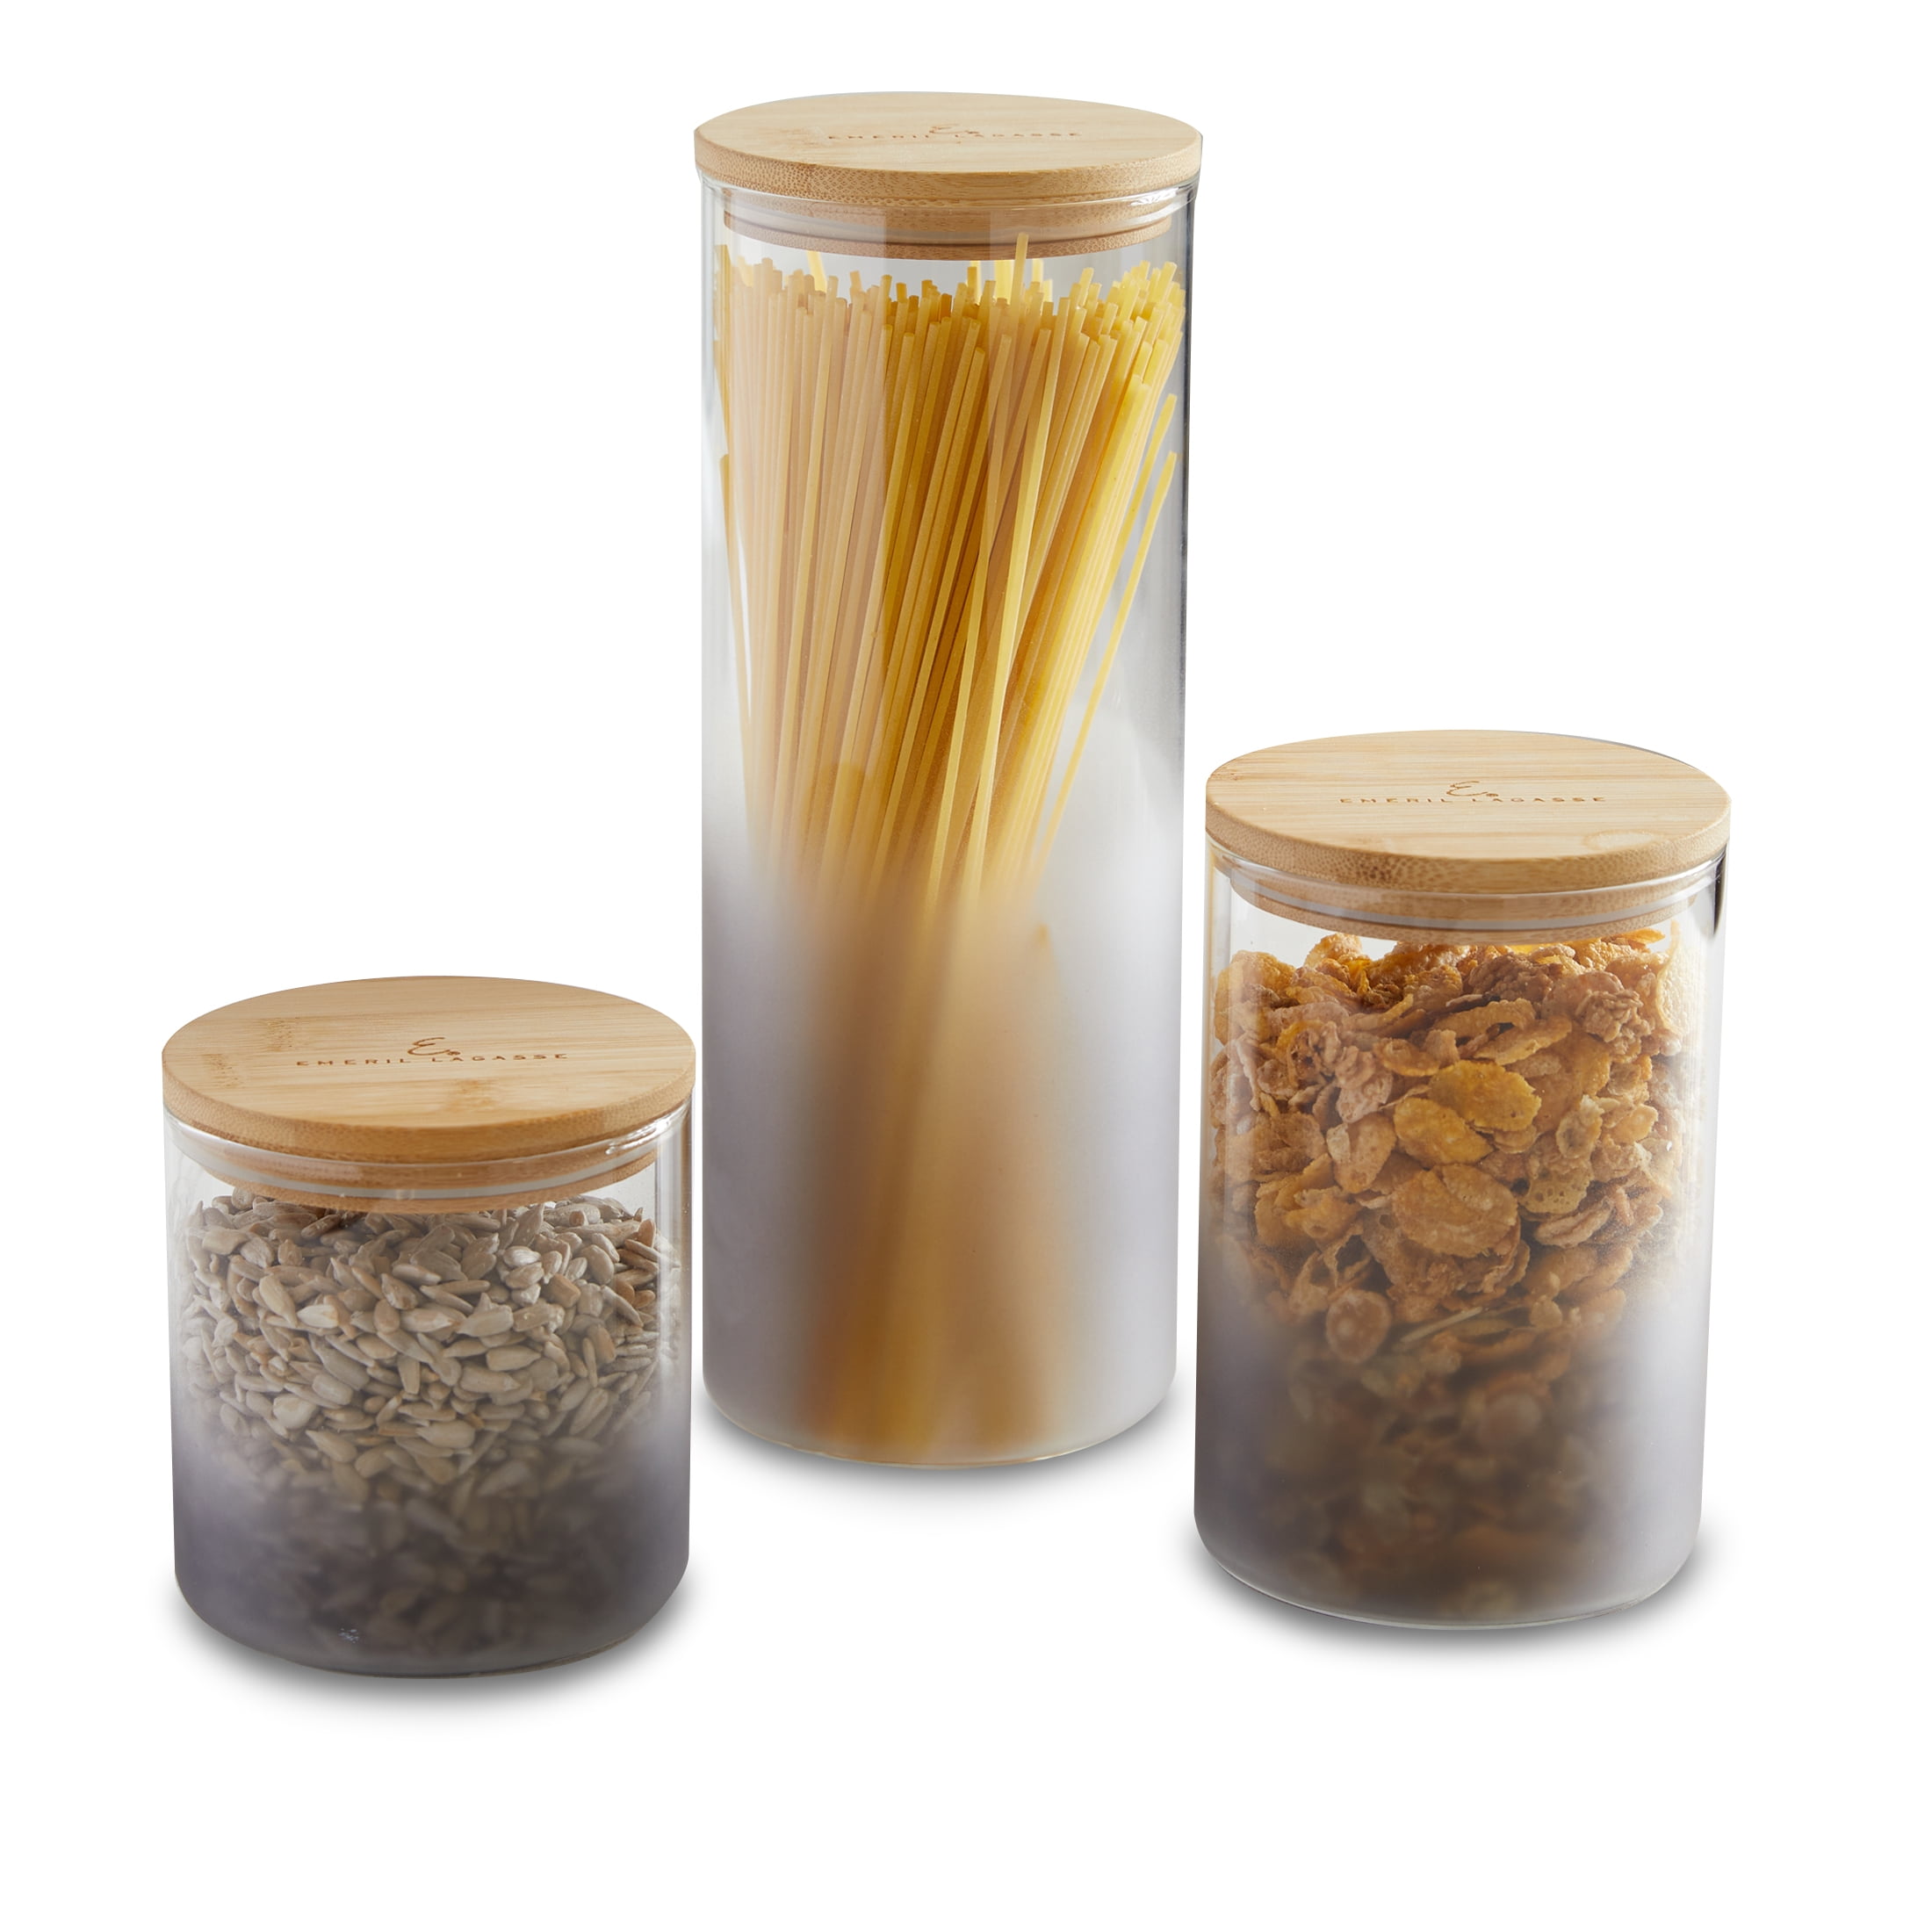 High Quality Food Glass Storage Jar With Wooden Bamboo Lid For Kitchen  Spice,Sugar,Candy - Buy Glass Storage Jar,Storage Jar Glass,Kitchen Storage